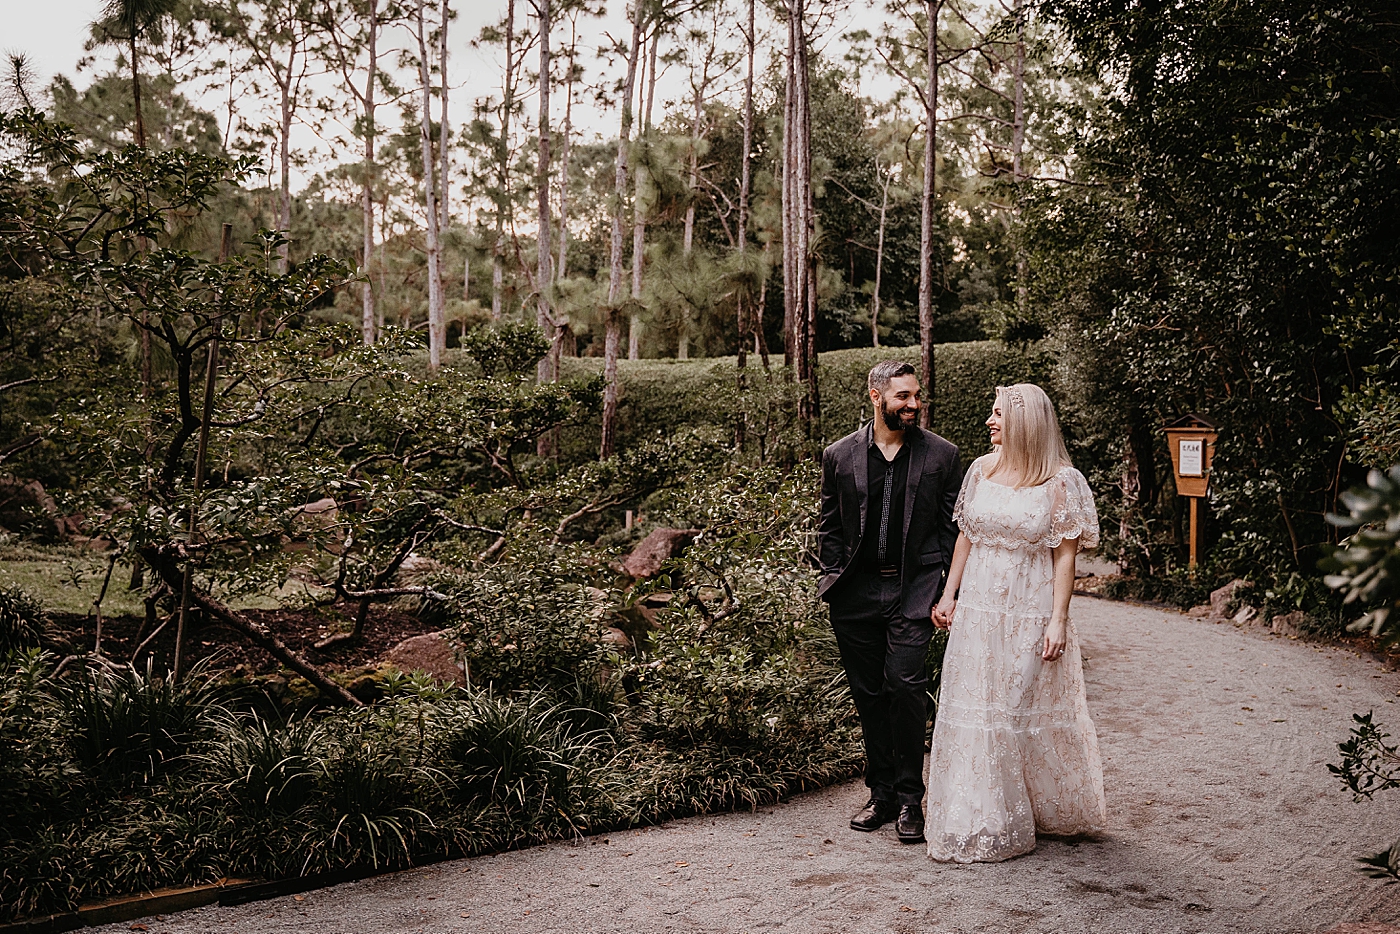 Couple strolling on the Garden path Morikami Museum and Japanese Gardens Engagement Photography captured by Krystal Capone Photography